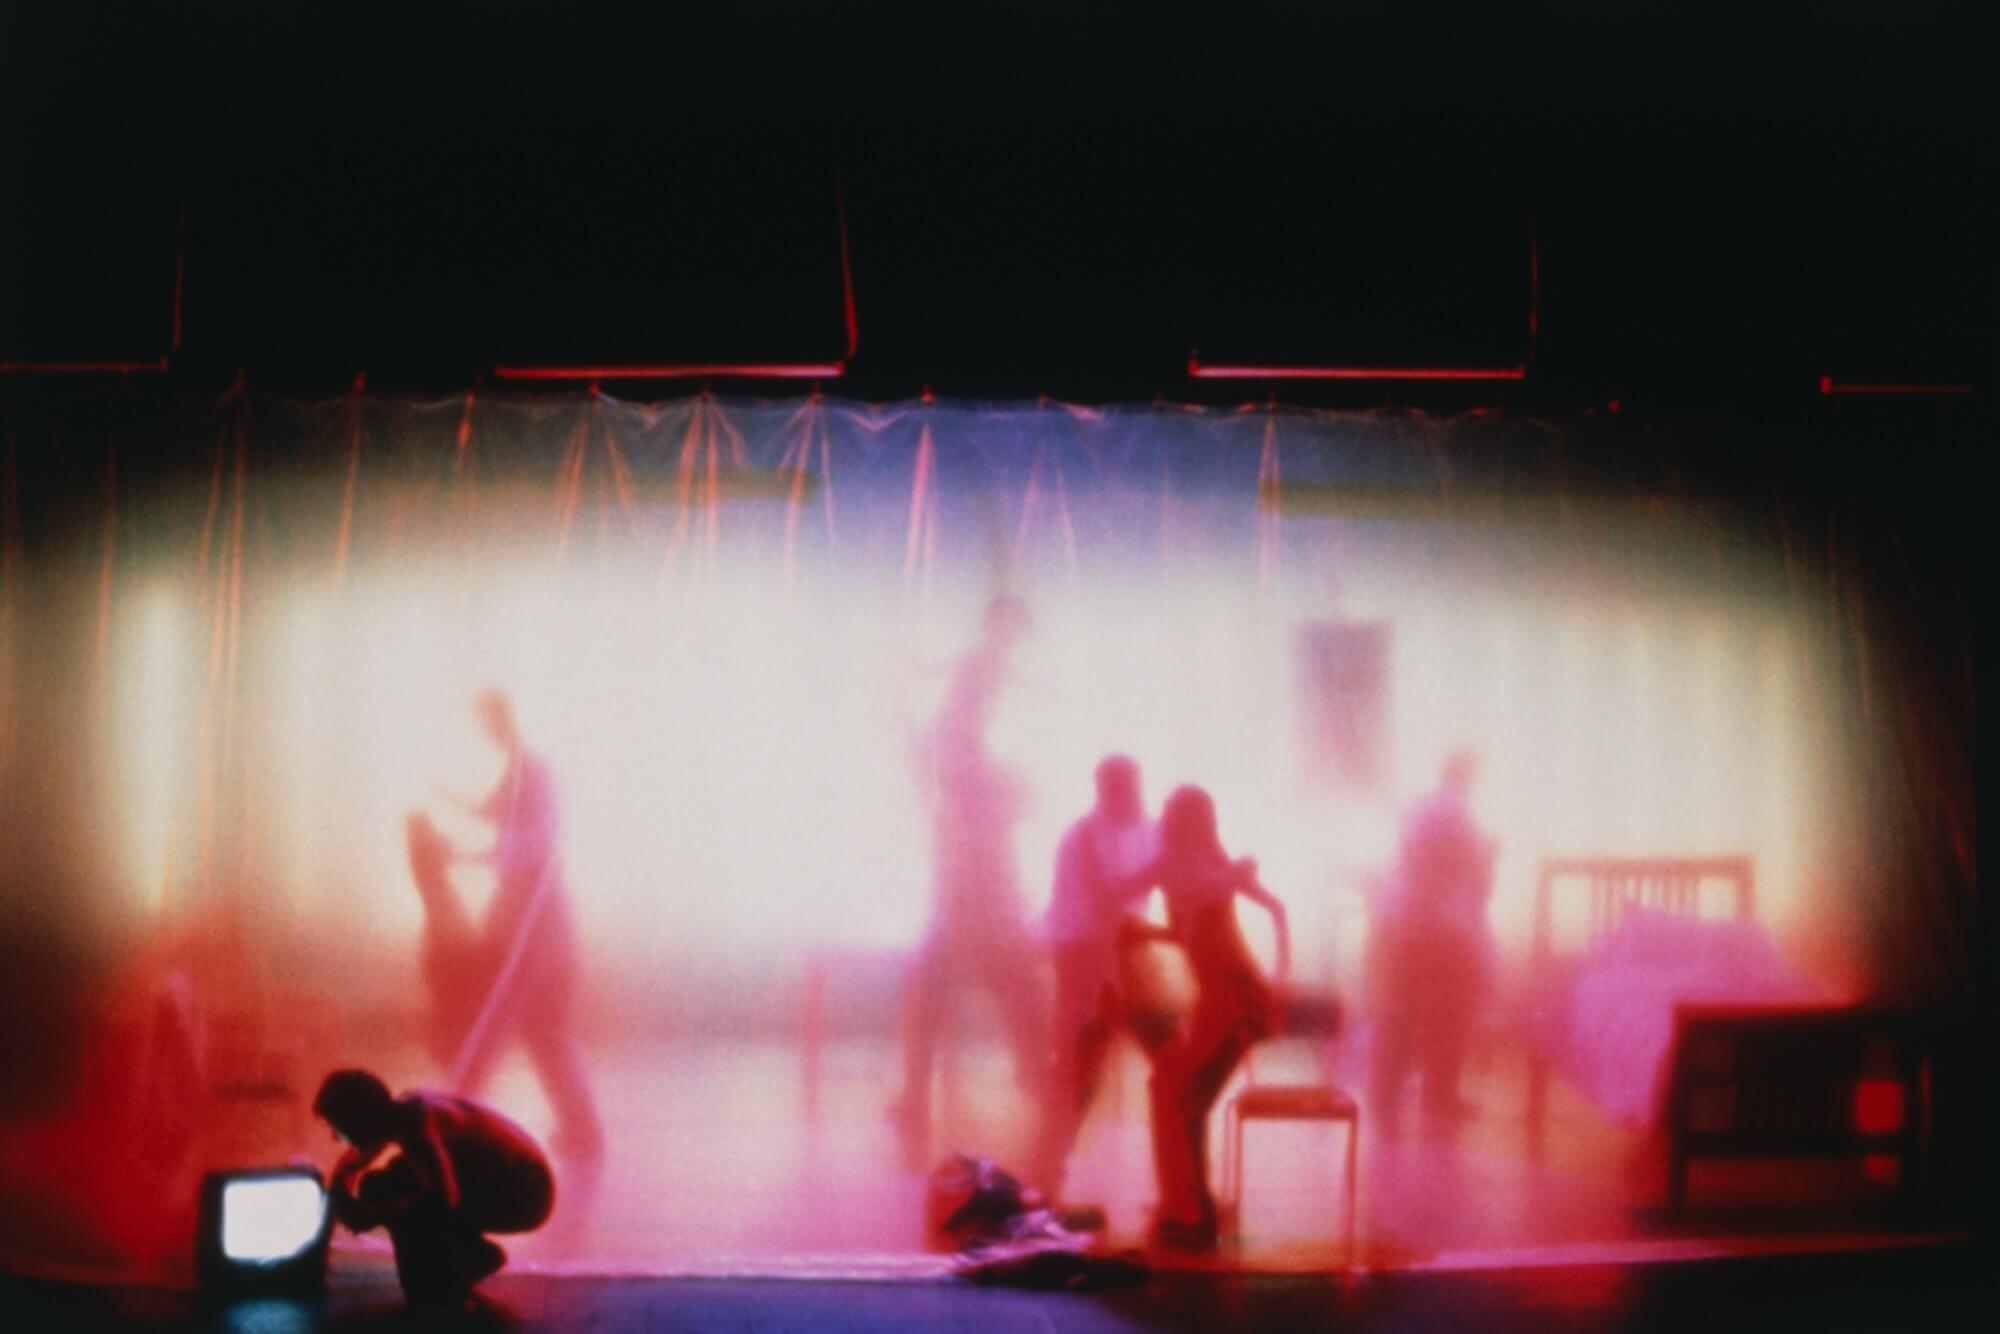 Shadow-like actors bathed in a rich pink move around the stage amongst chairs and a bed with a sheer curtain in front of them.